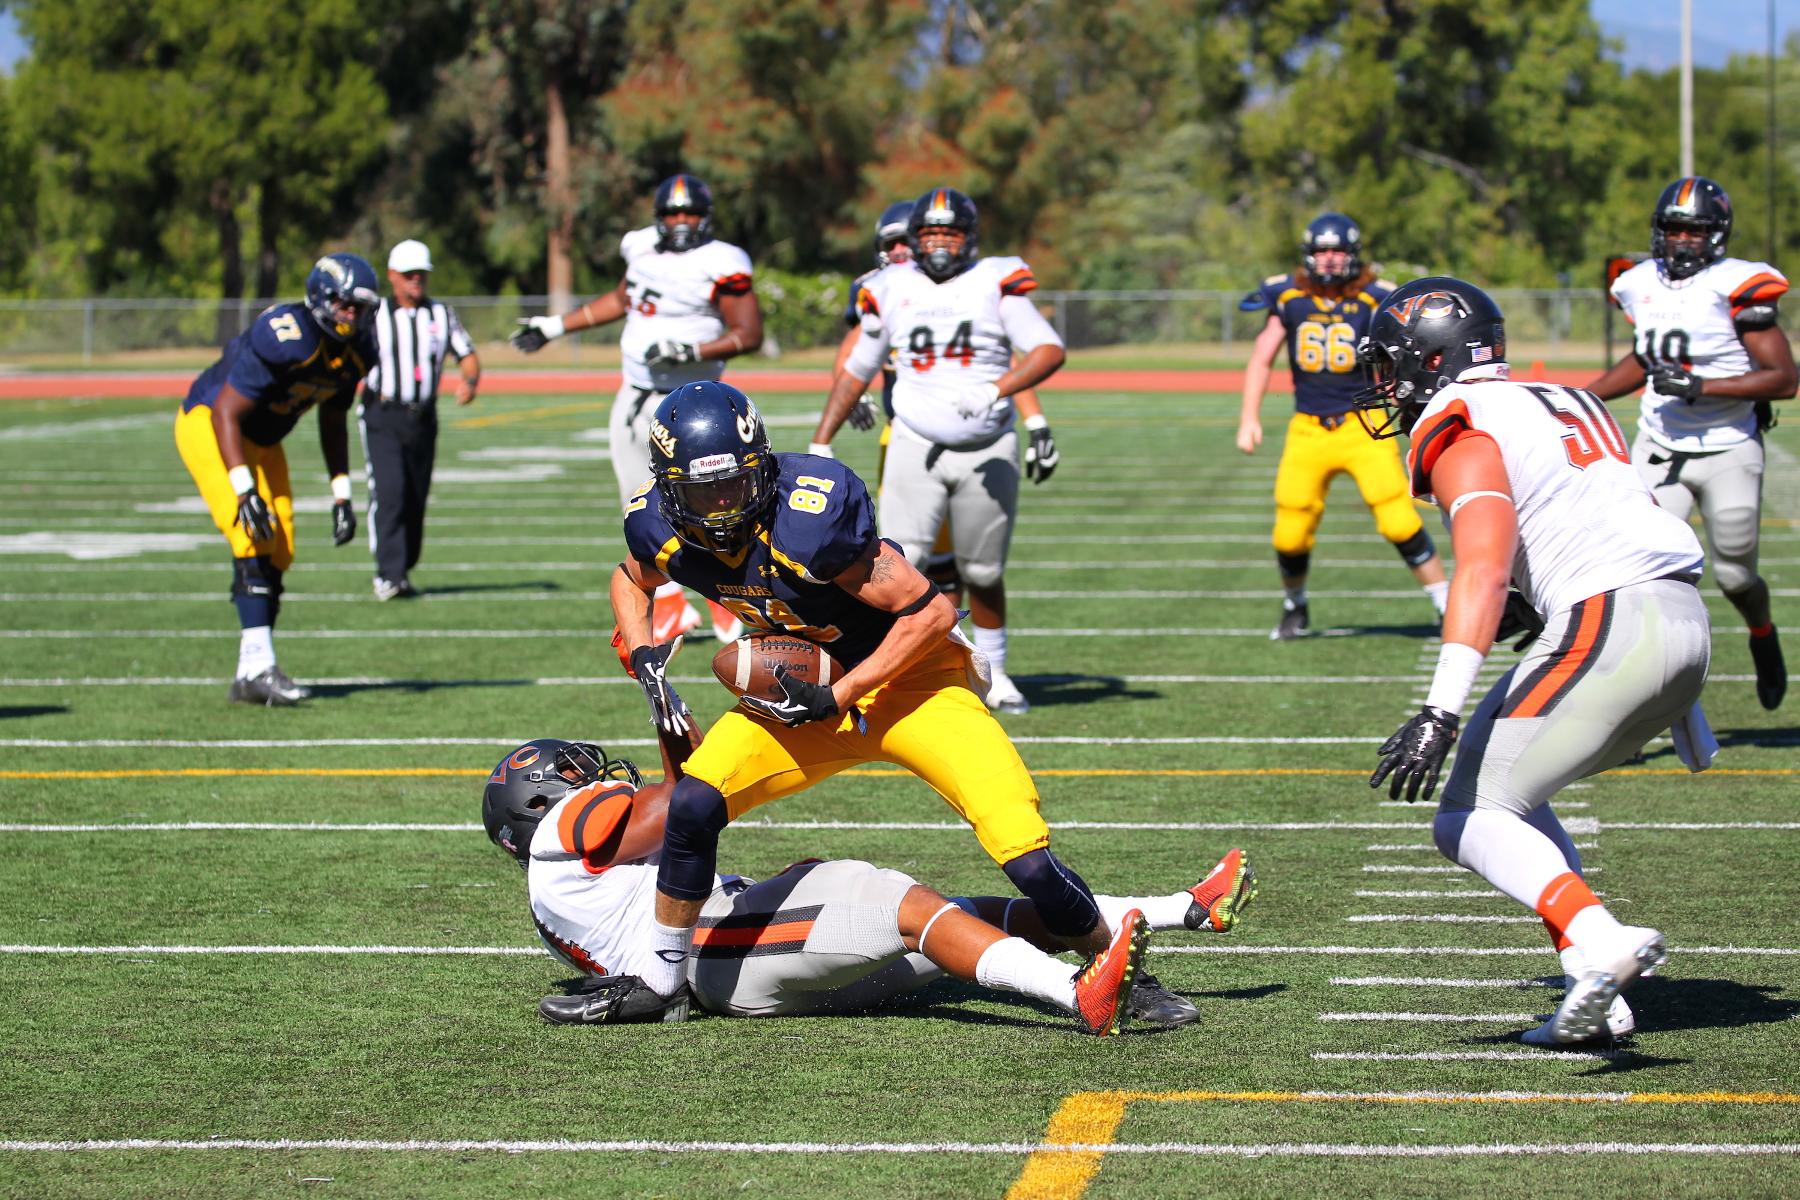 Canyons Wide Receiver Nick Jones Named to All-California Team